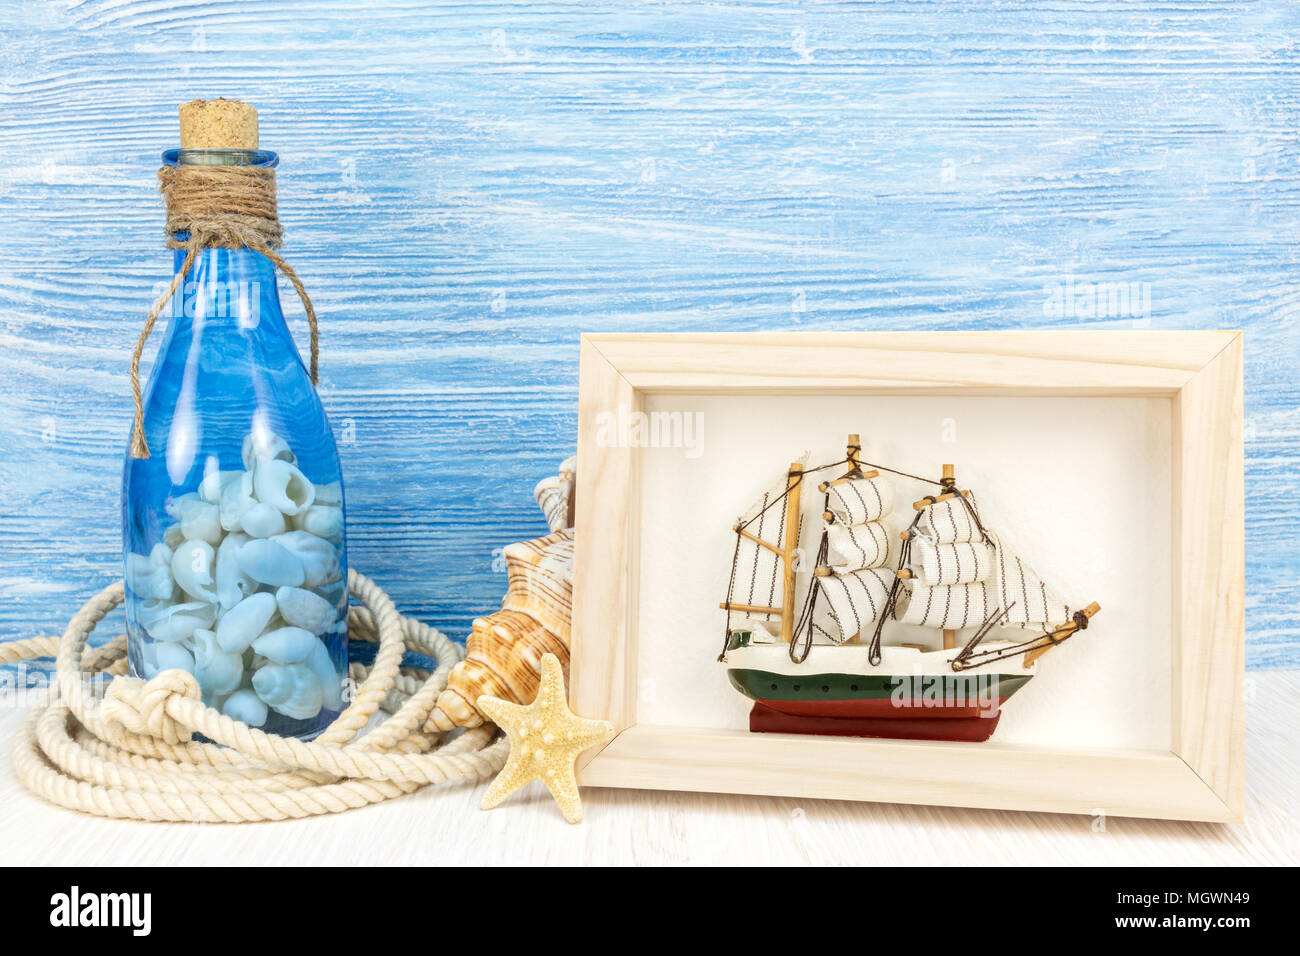 summer vacation concept – bottle with seashells, photo frame with sailboat, starfish and marine rope against blue wooden background Stock Photo